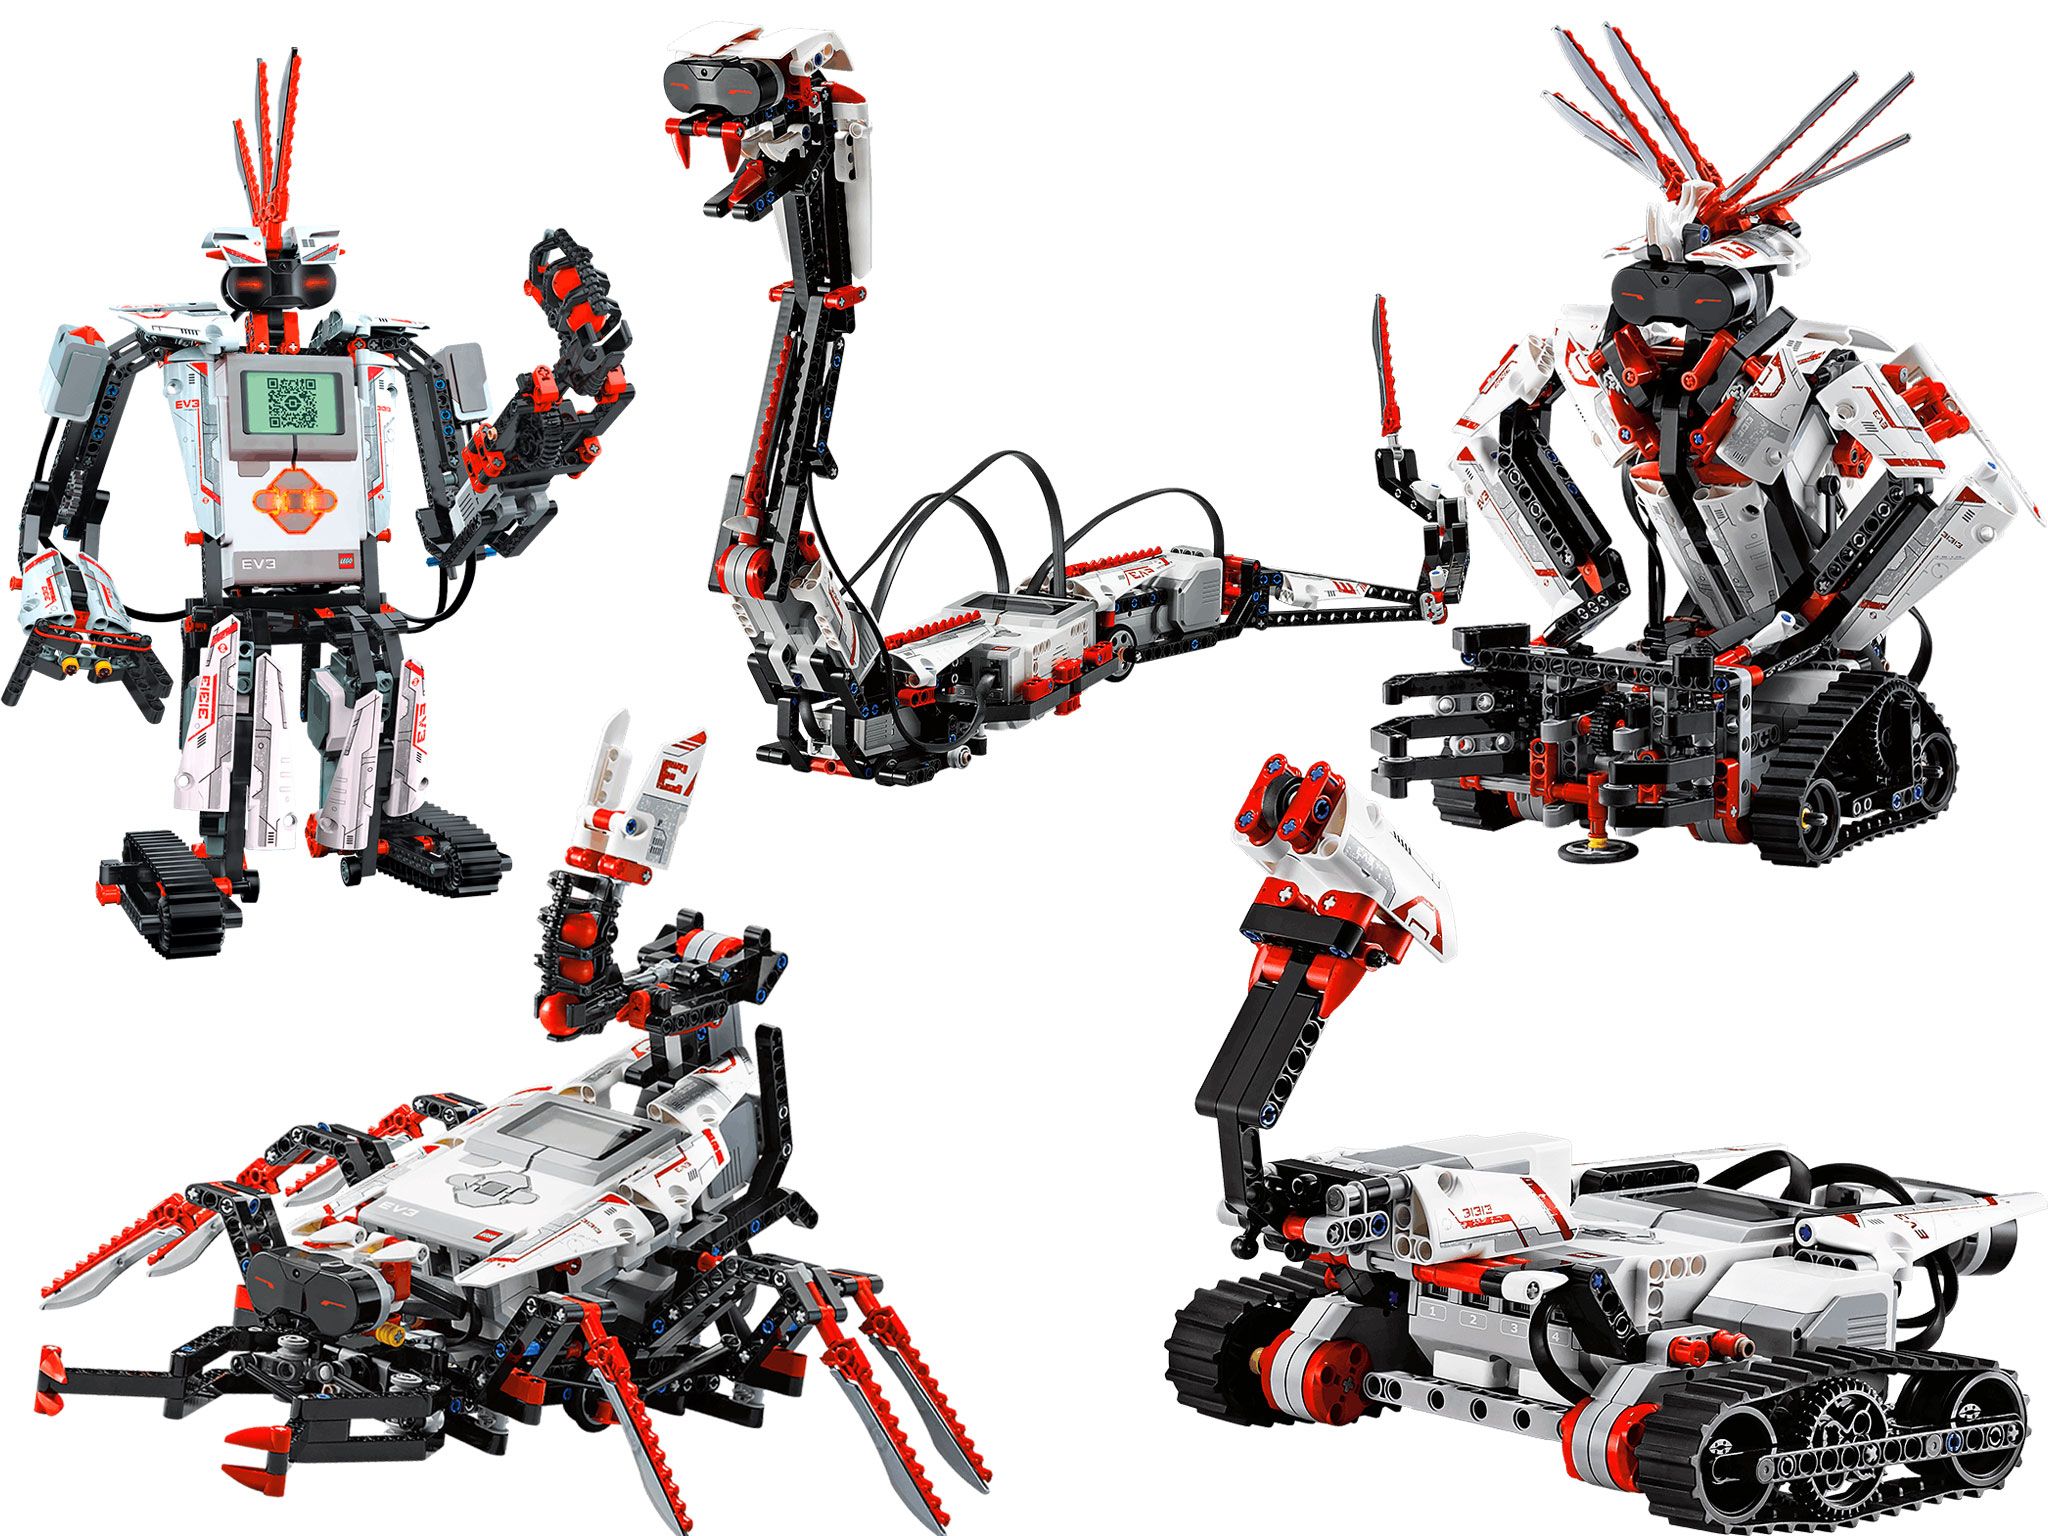 Lego Mindstorms EV3 - ROBOTS: Your Guide to the of Robotics